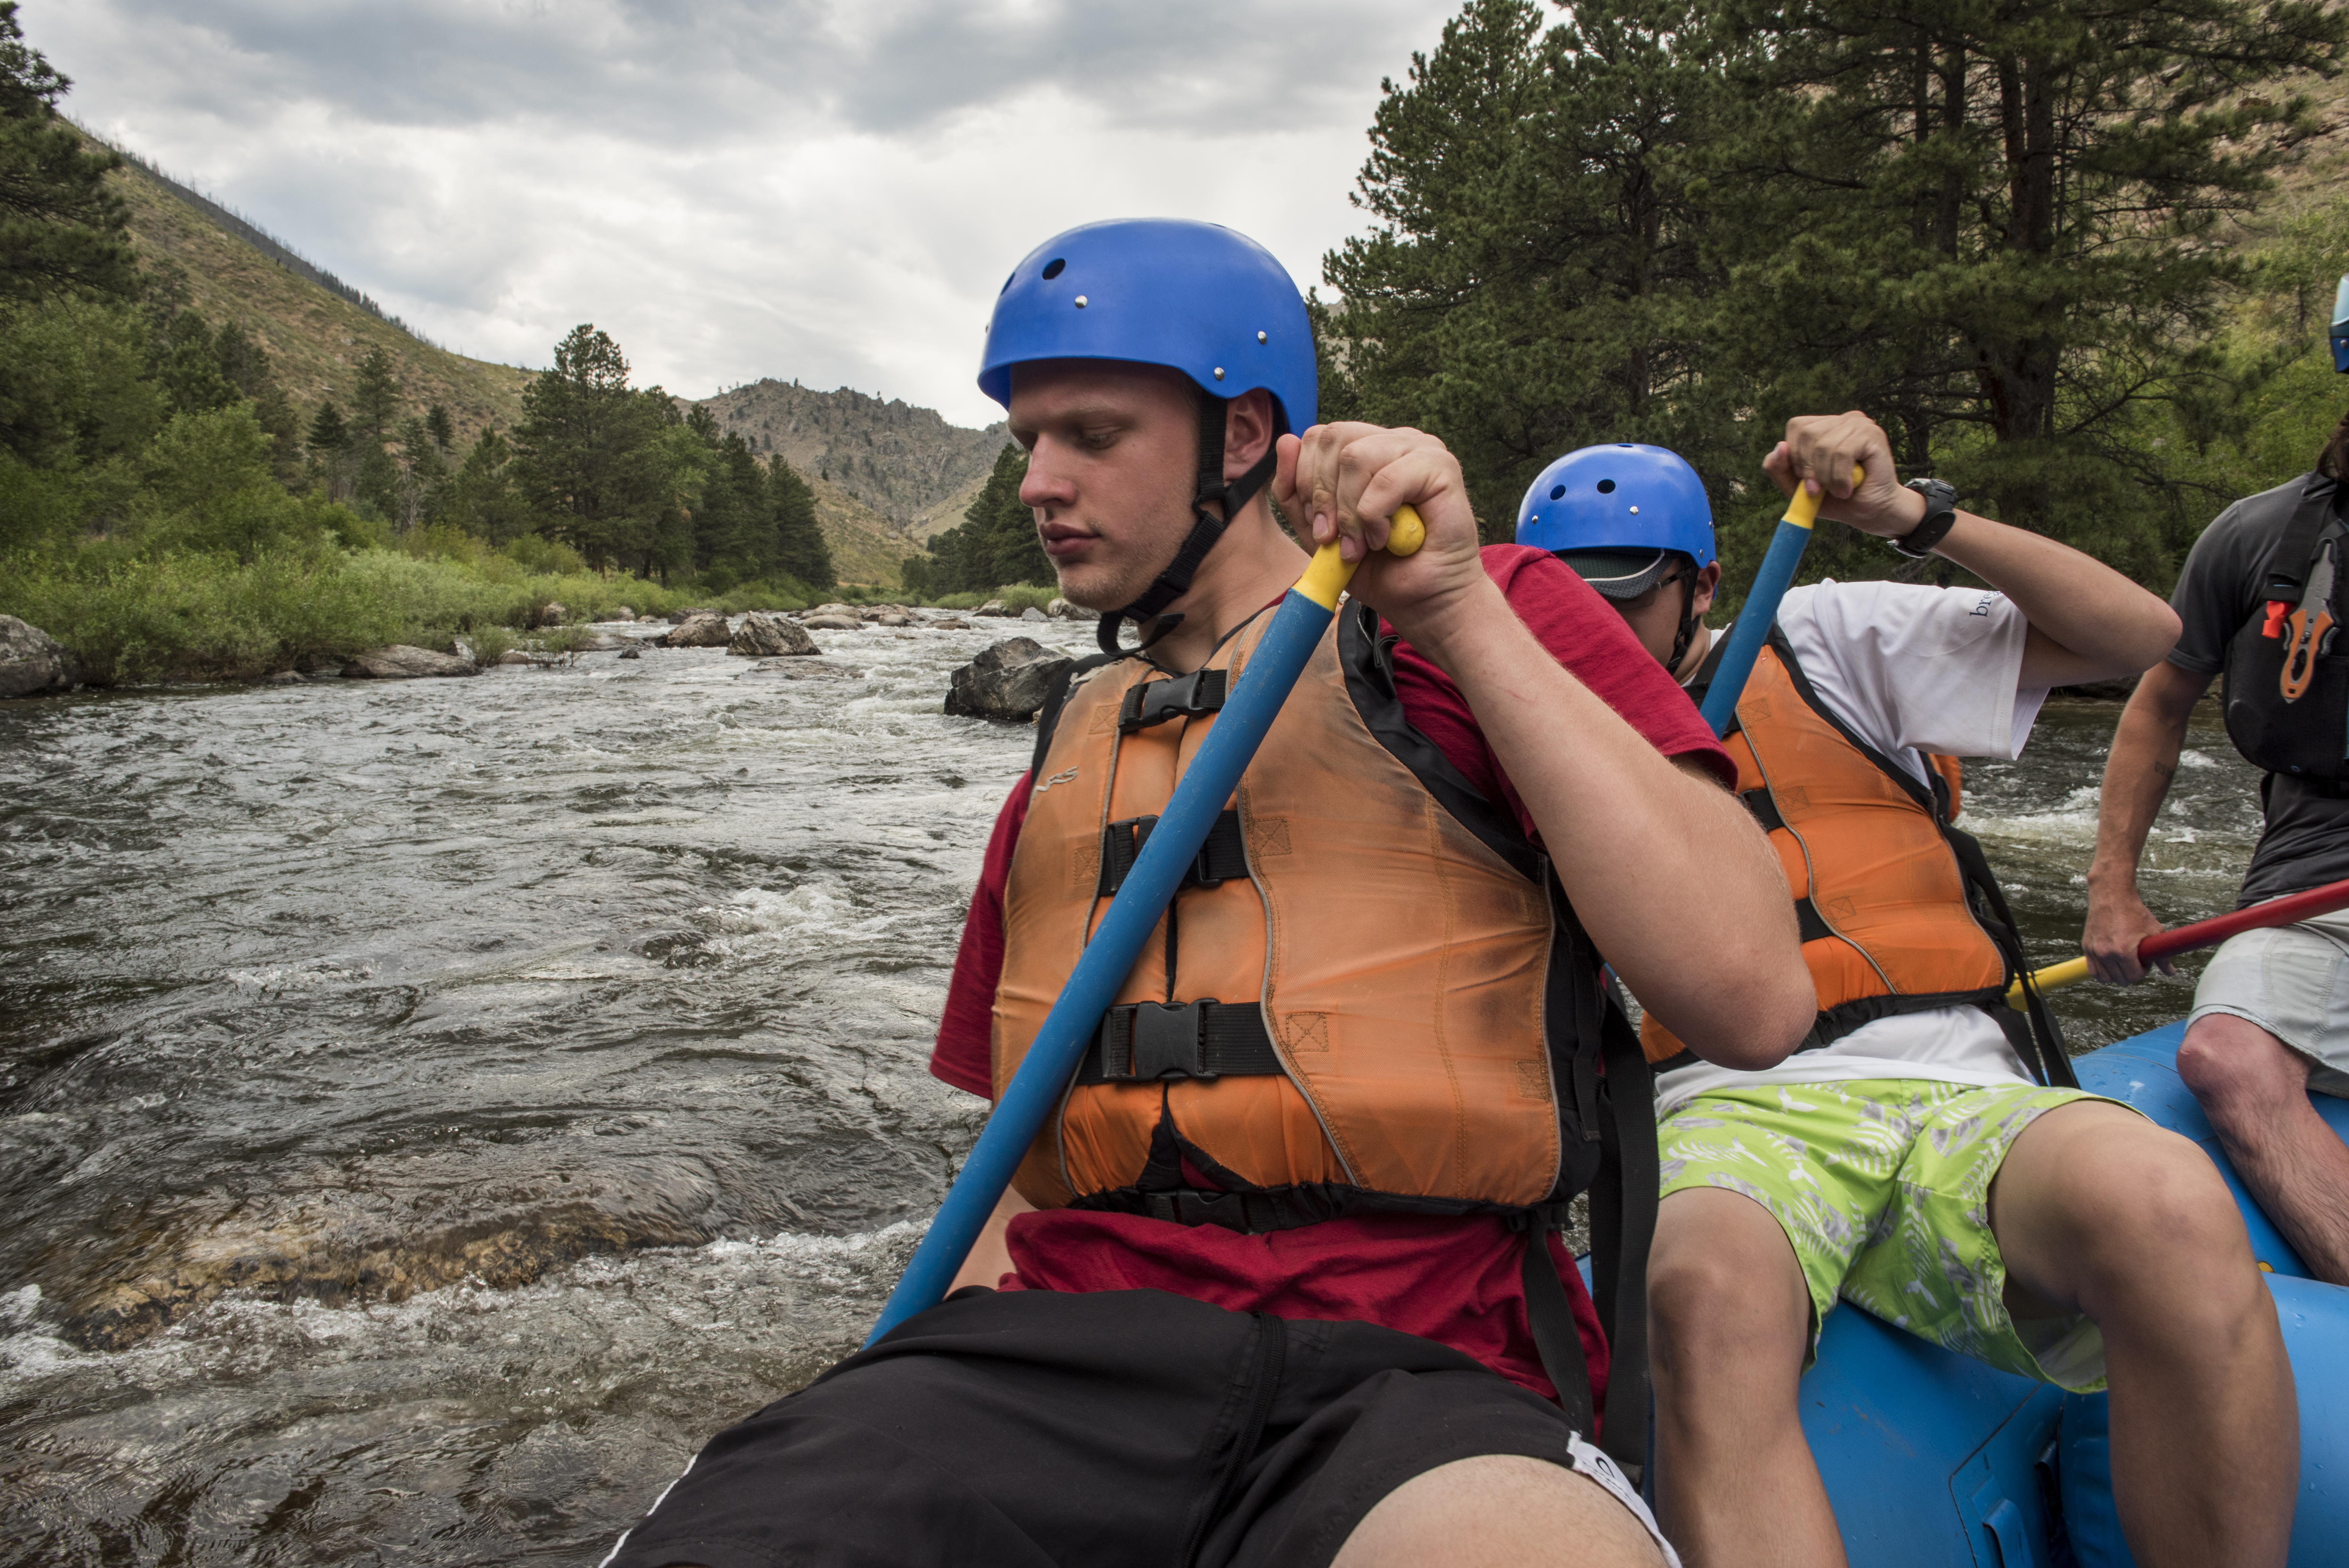 Andrew Rode (front) and Alex Pierce lean into their paddles during a whitewater rafting trip on the Cache Le Poudre River, near Fort Collins,  Colorado.     Troop 208 from Pennsylvania is on a two week trip of hiking, rafting, fishing and other adventures